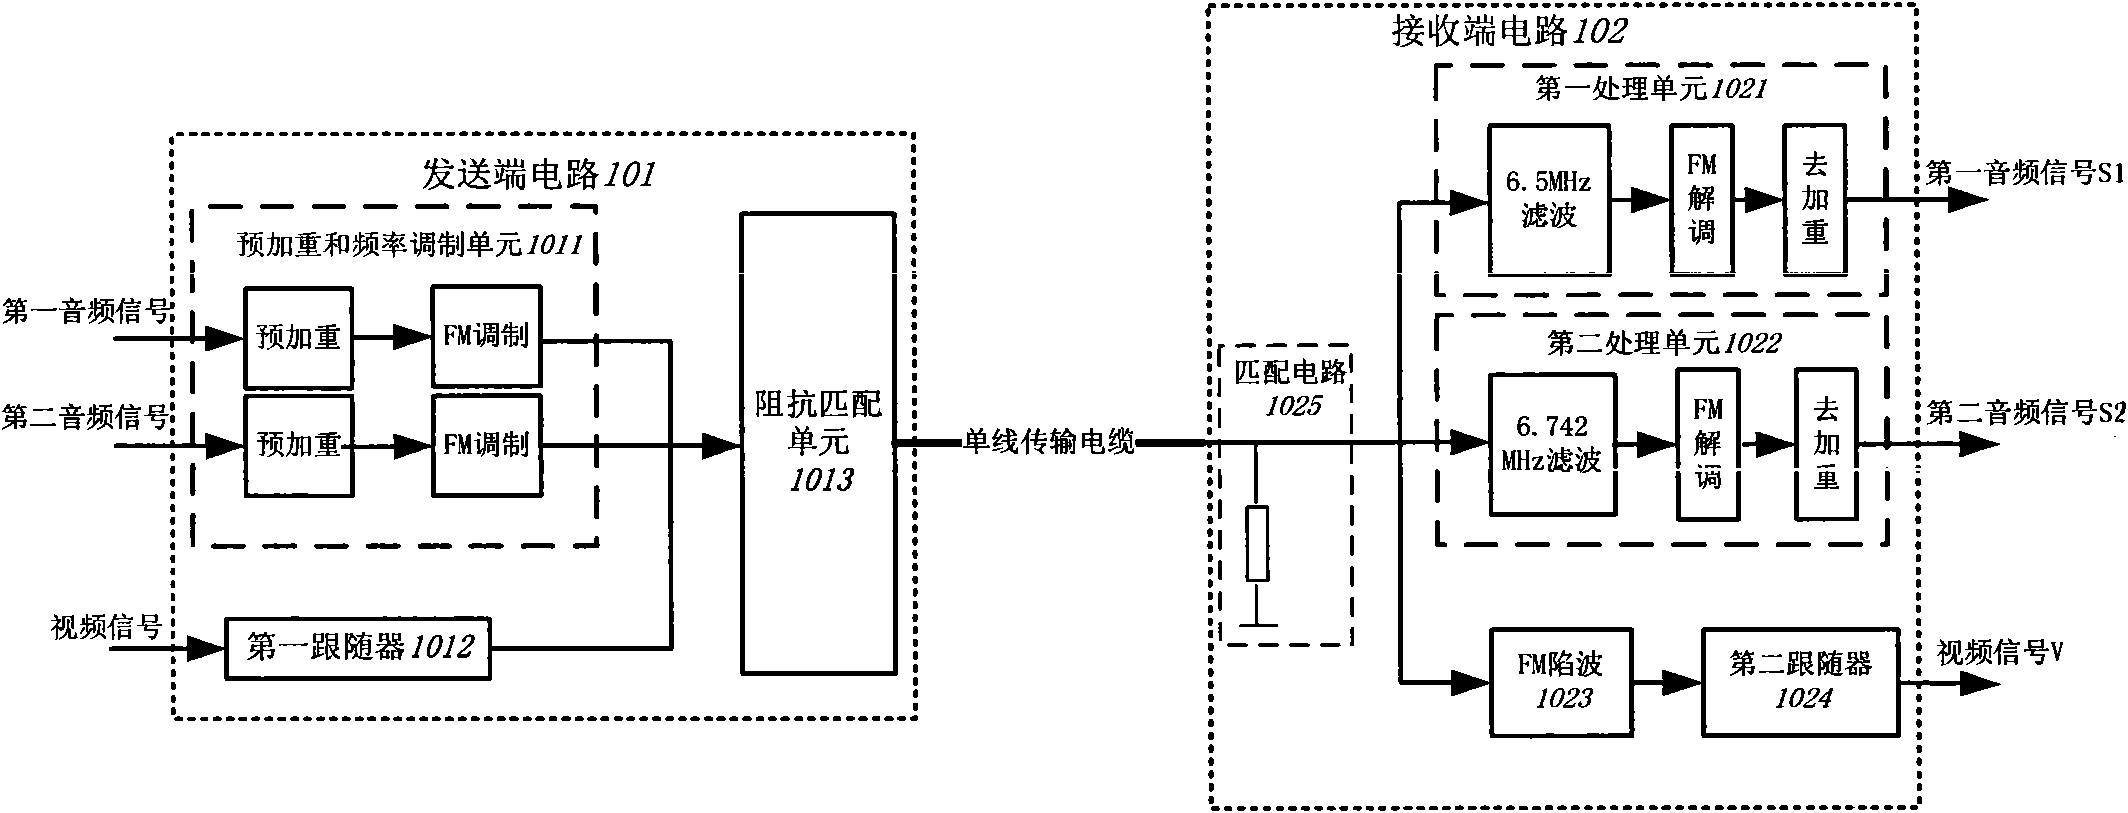 Circuit for realizing single wire transmission of audio and video signals